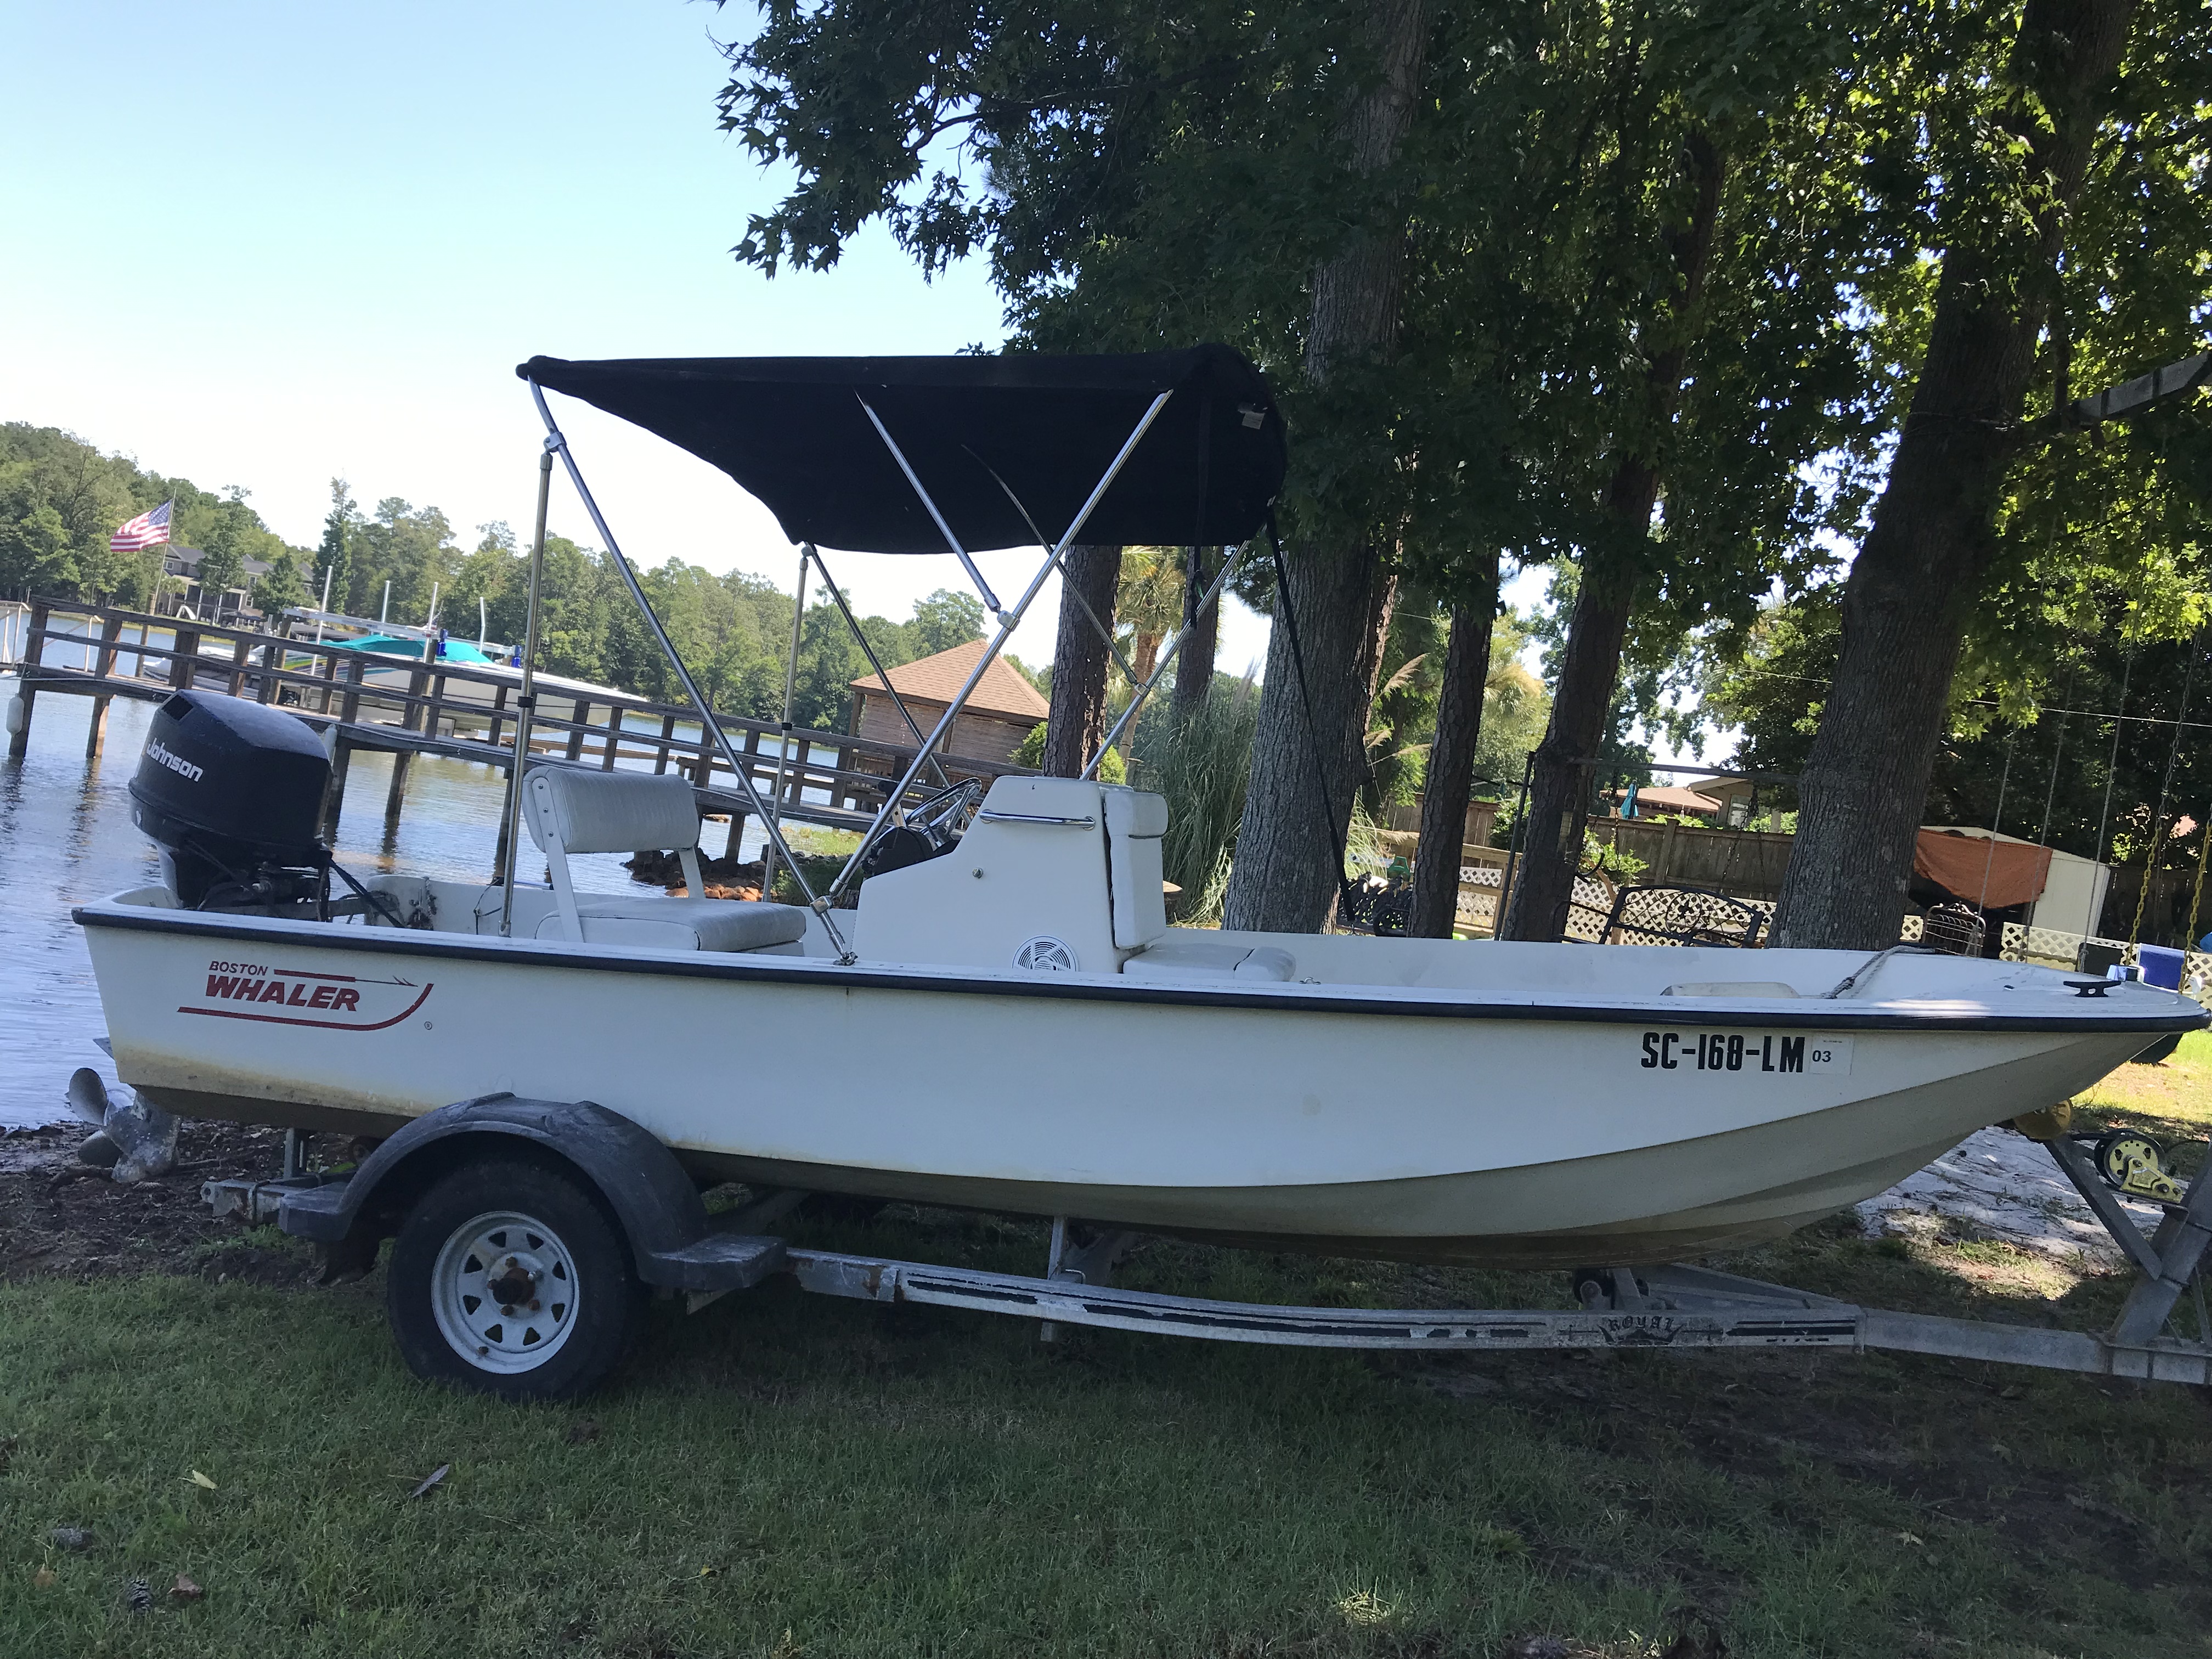 1977 17 foot Boston Whaler Newport Power boat for sale in Chapin, SC - image 4 